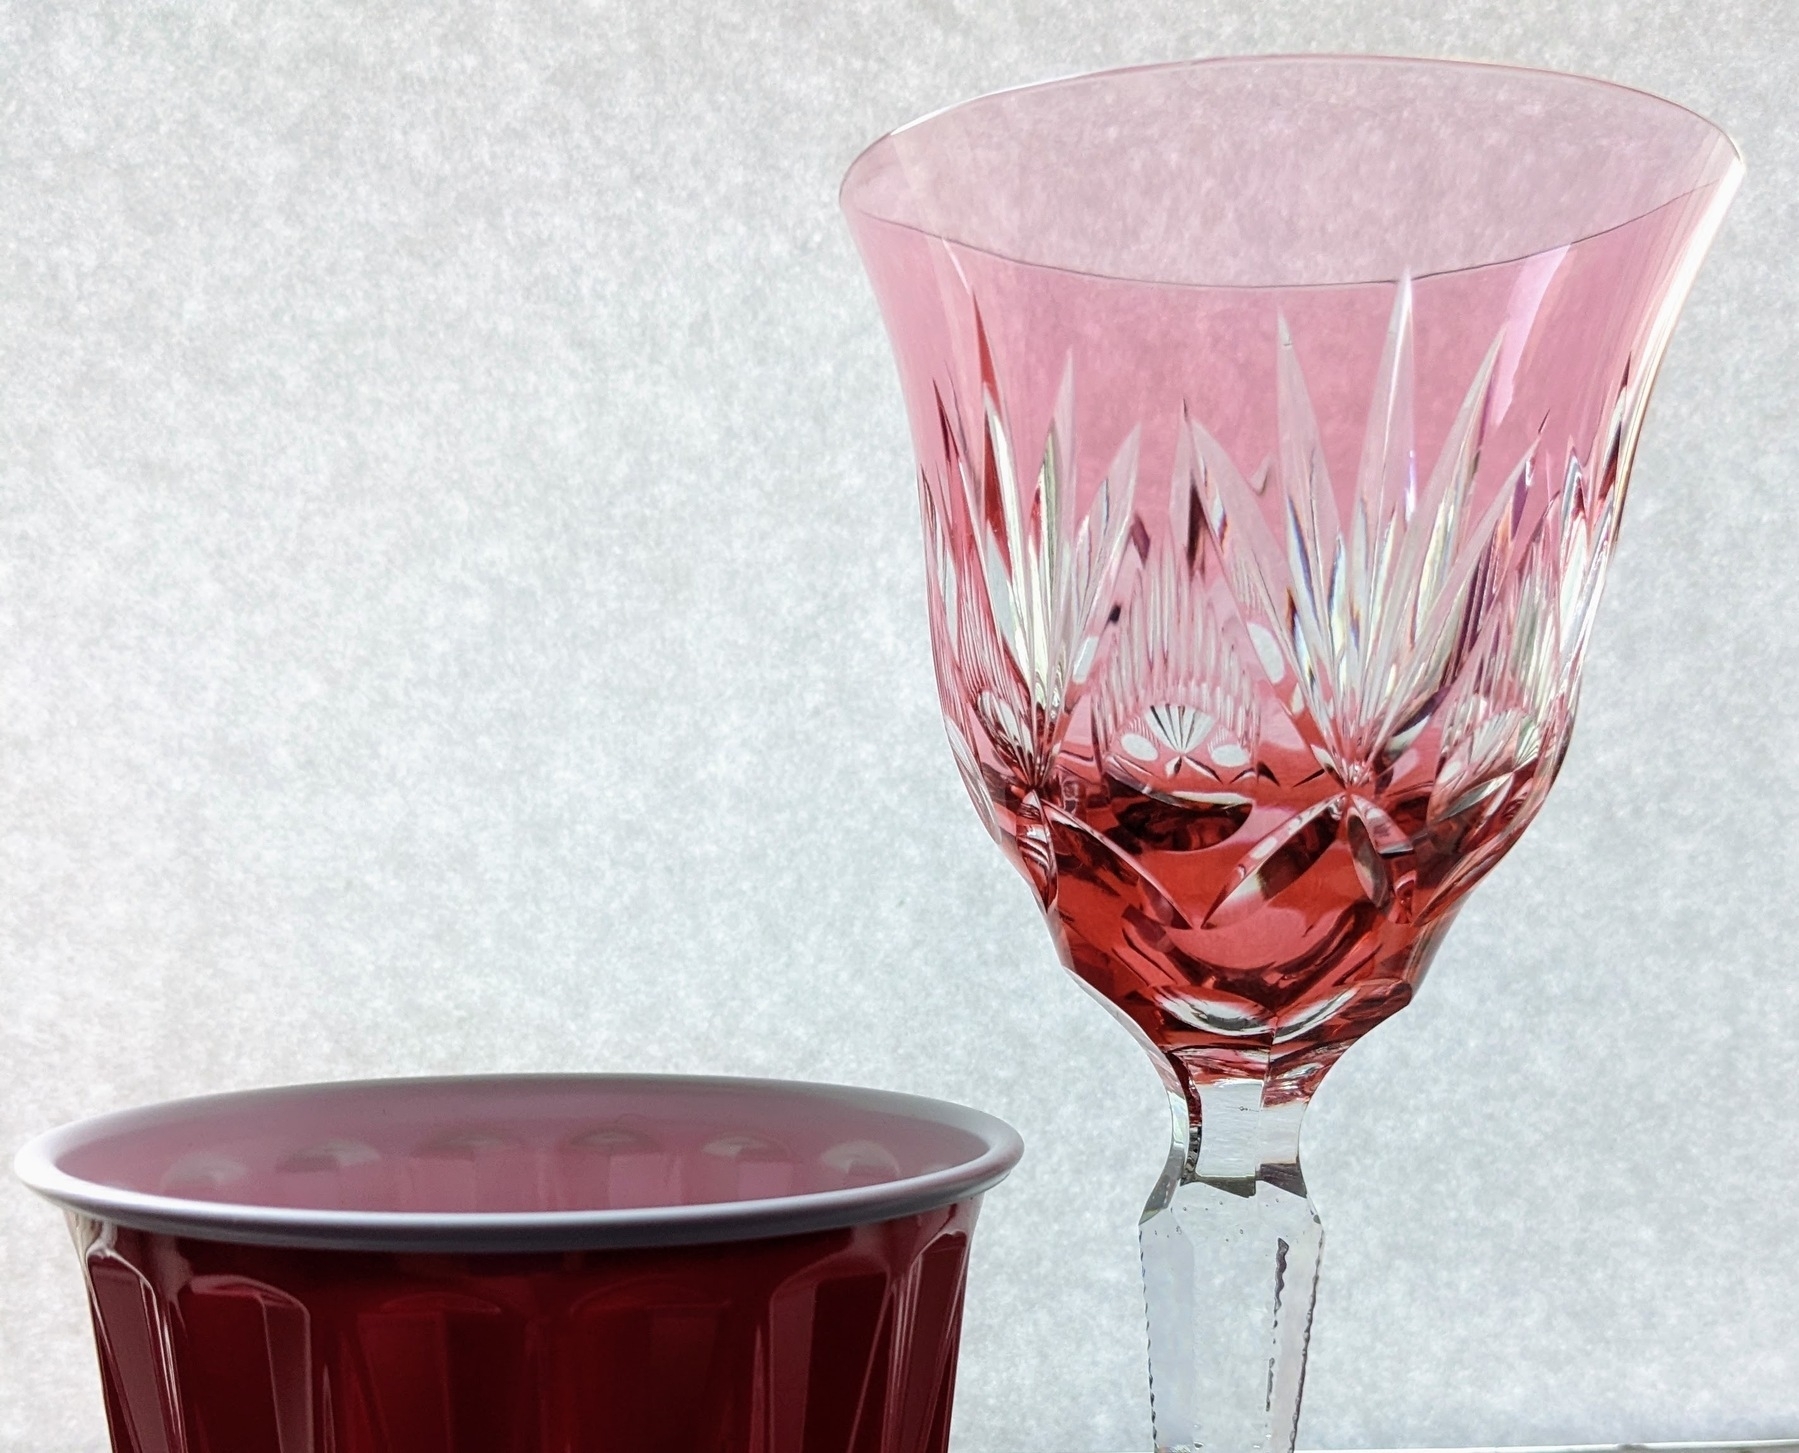 a plastic disposable cup is placed next to a crystal goblet